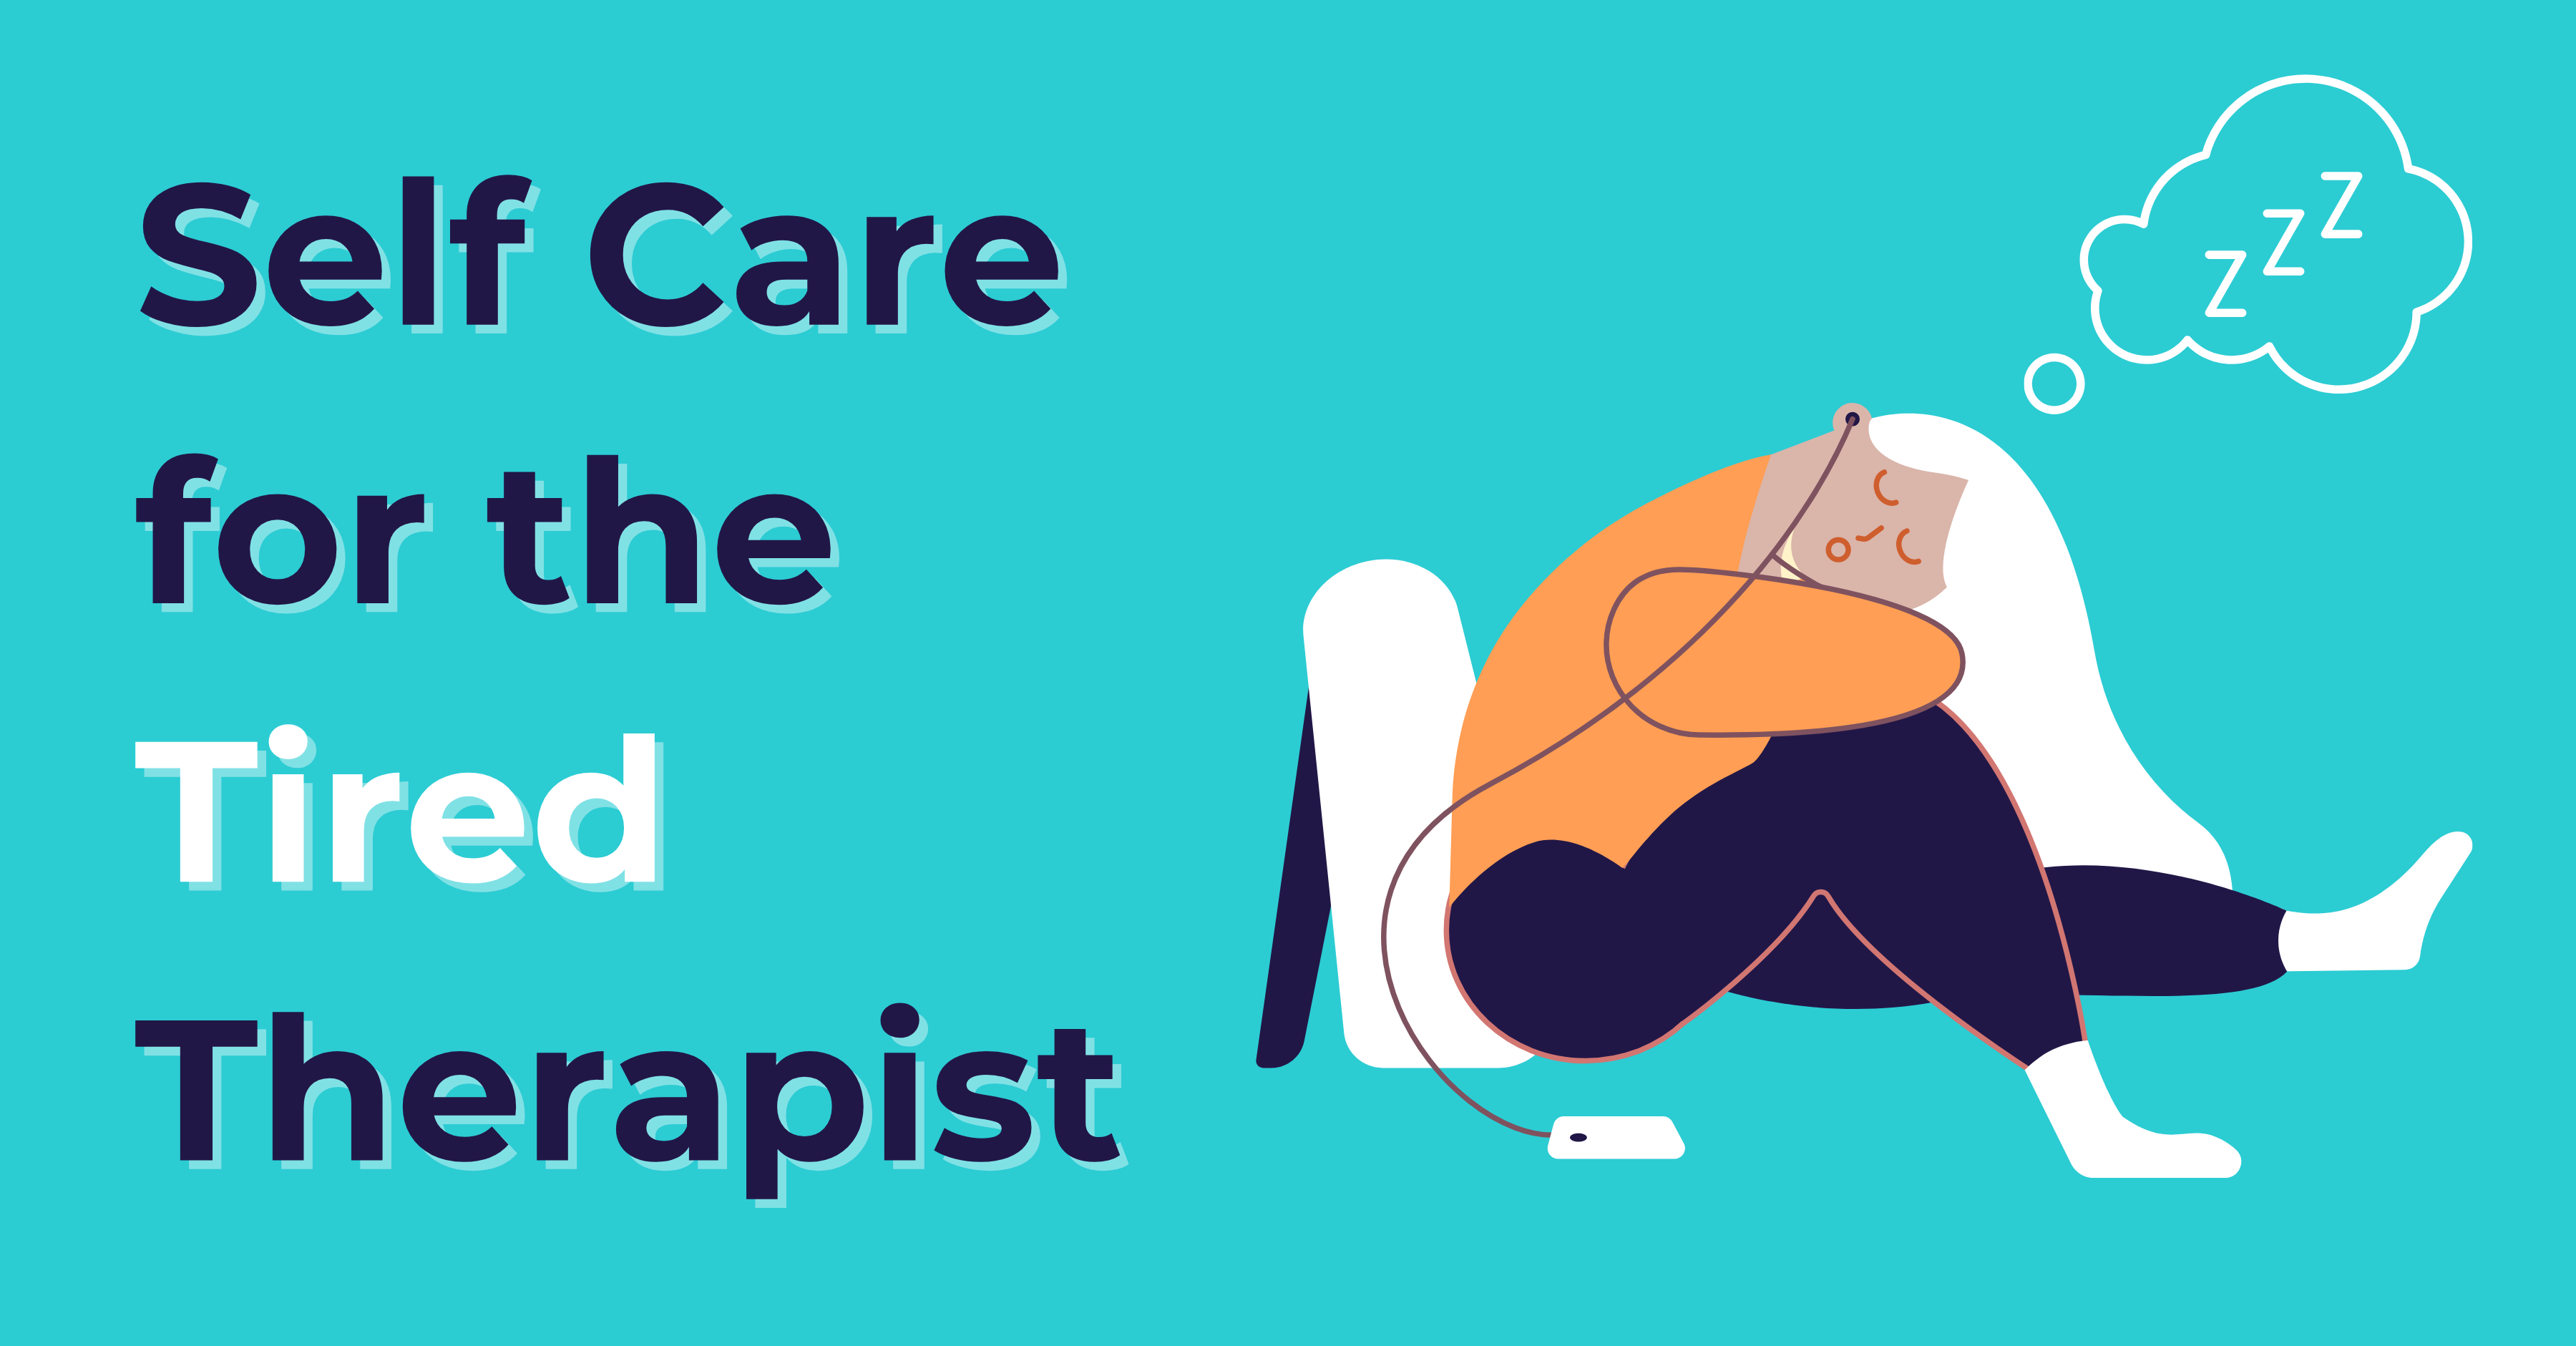 Self-care for the Tired Therapist